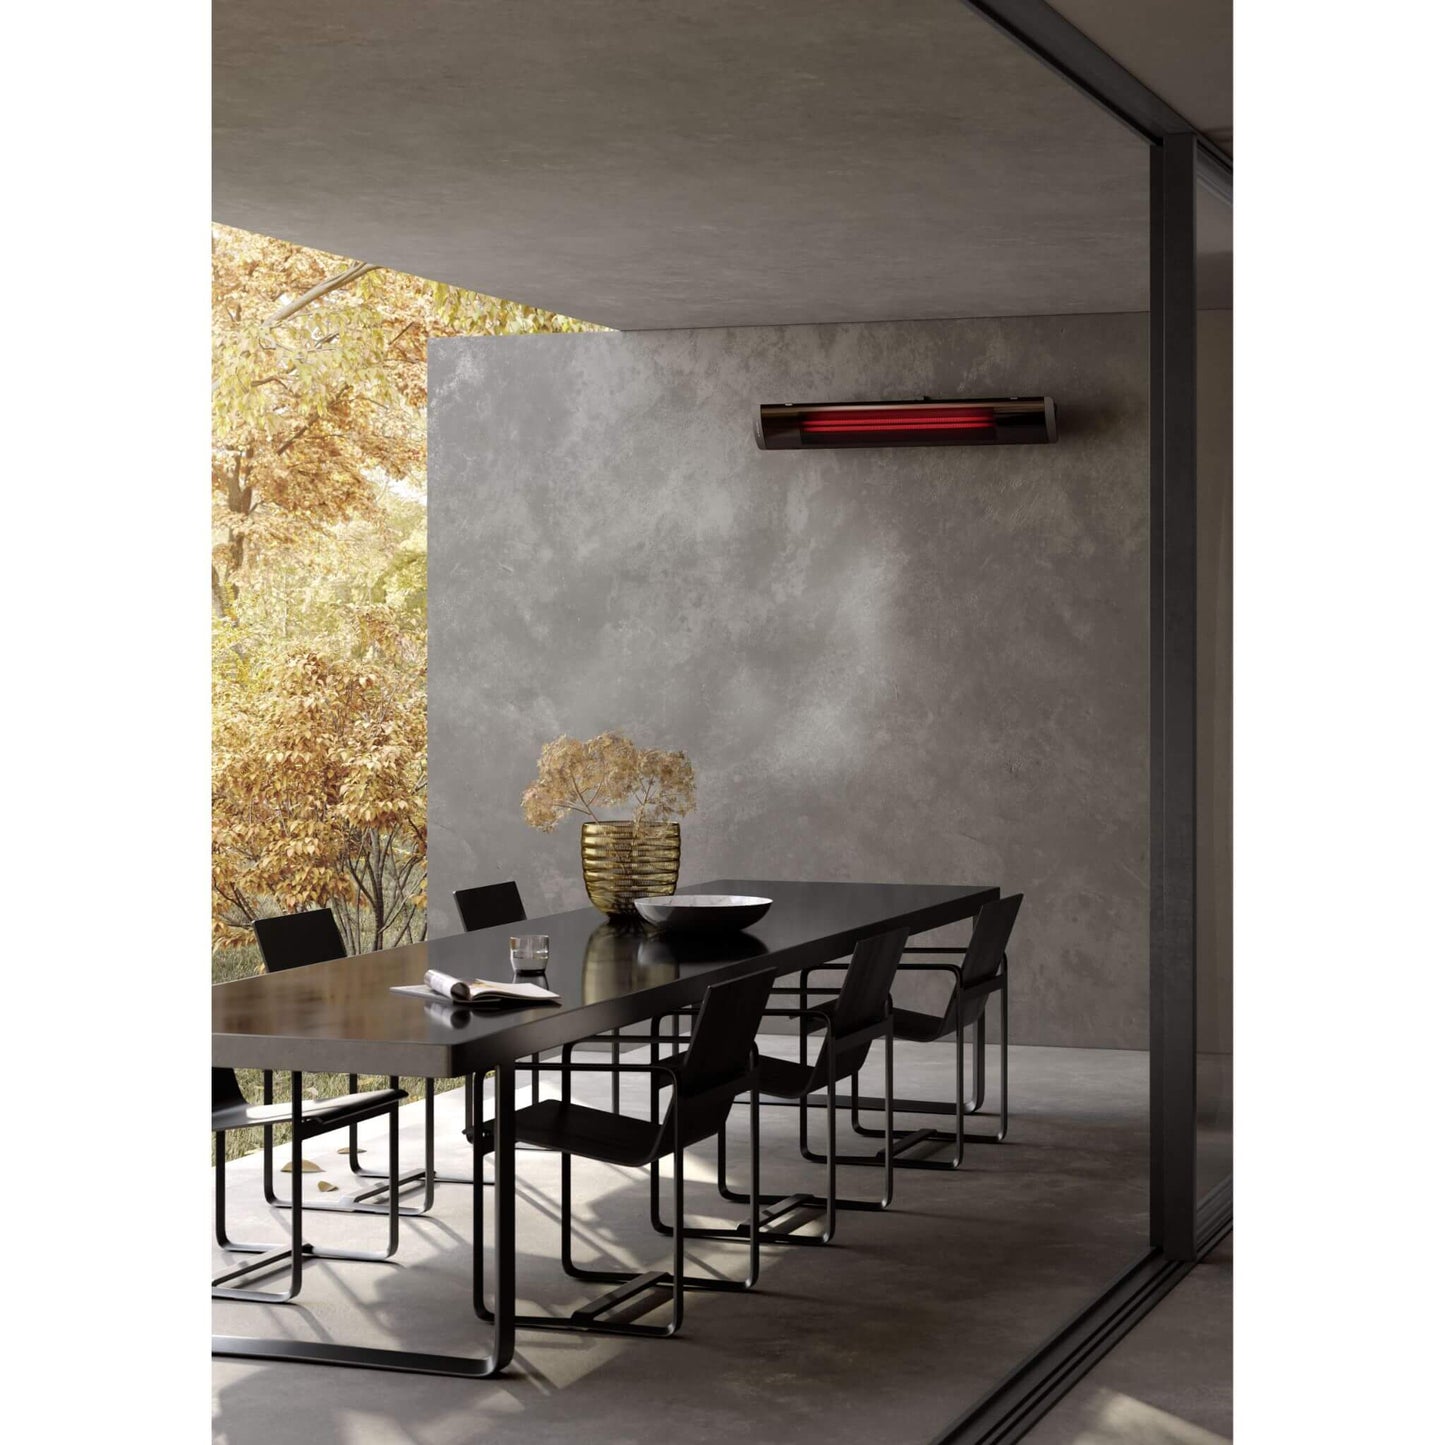 Heatscope Pure radiant heater - infrared patio heater with wall mounting parts for alfresco outdoor heating